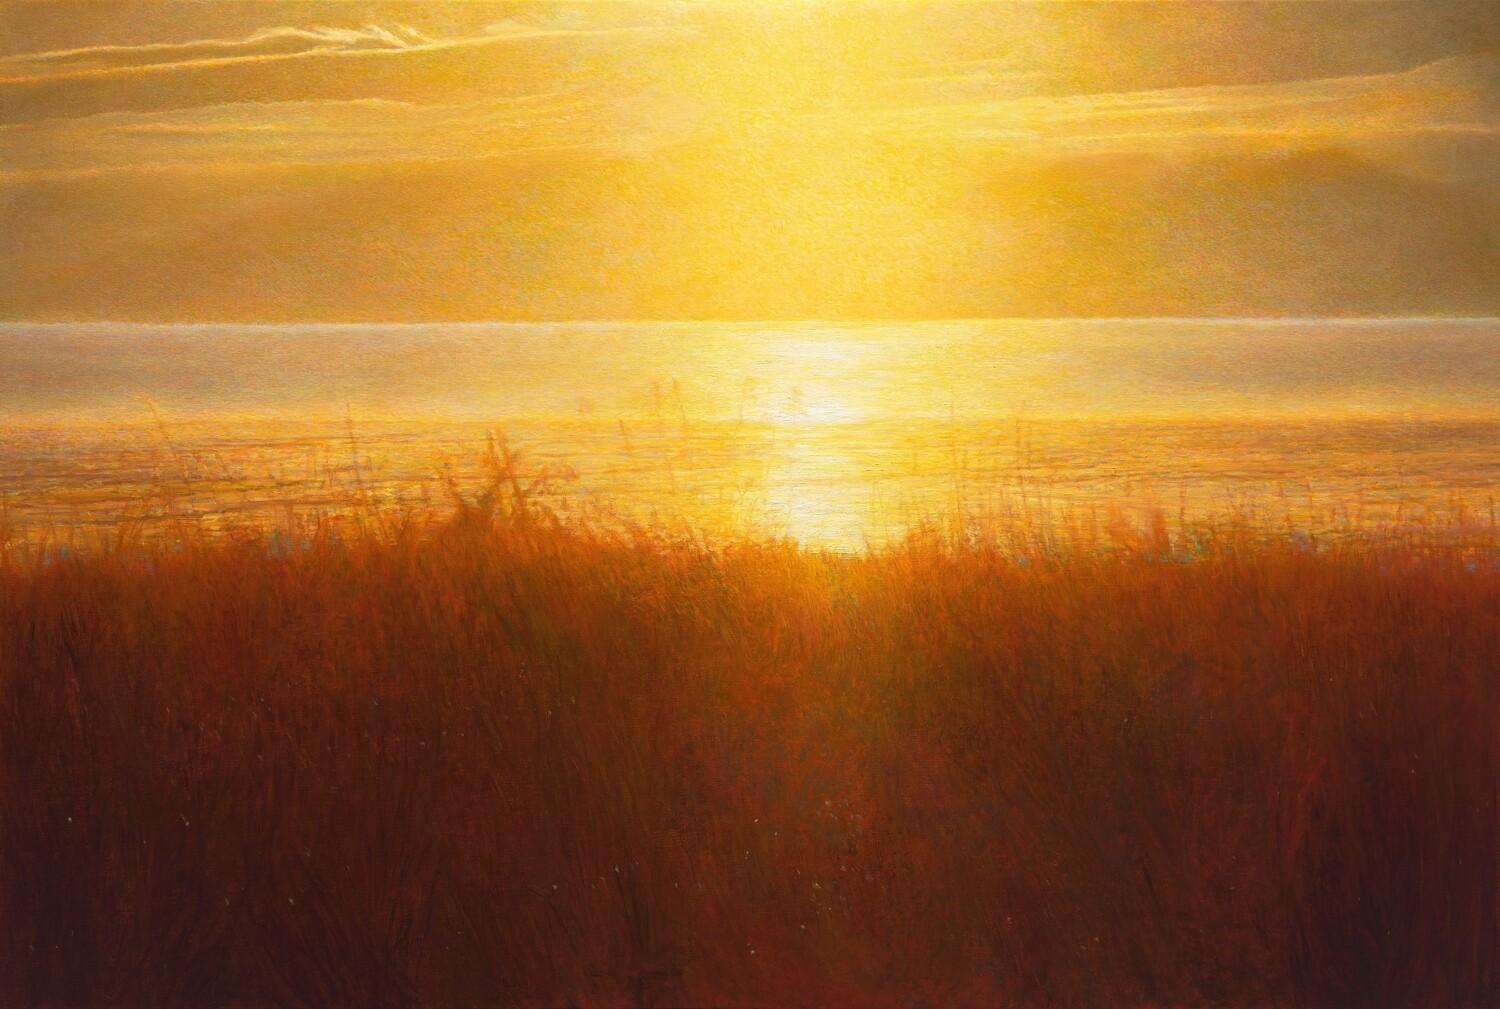 Paul Chizik Landscape Painting - Transitions of Yellow and Orange